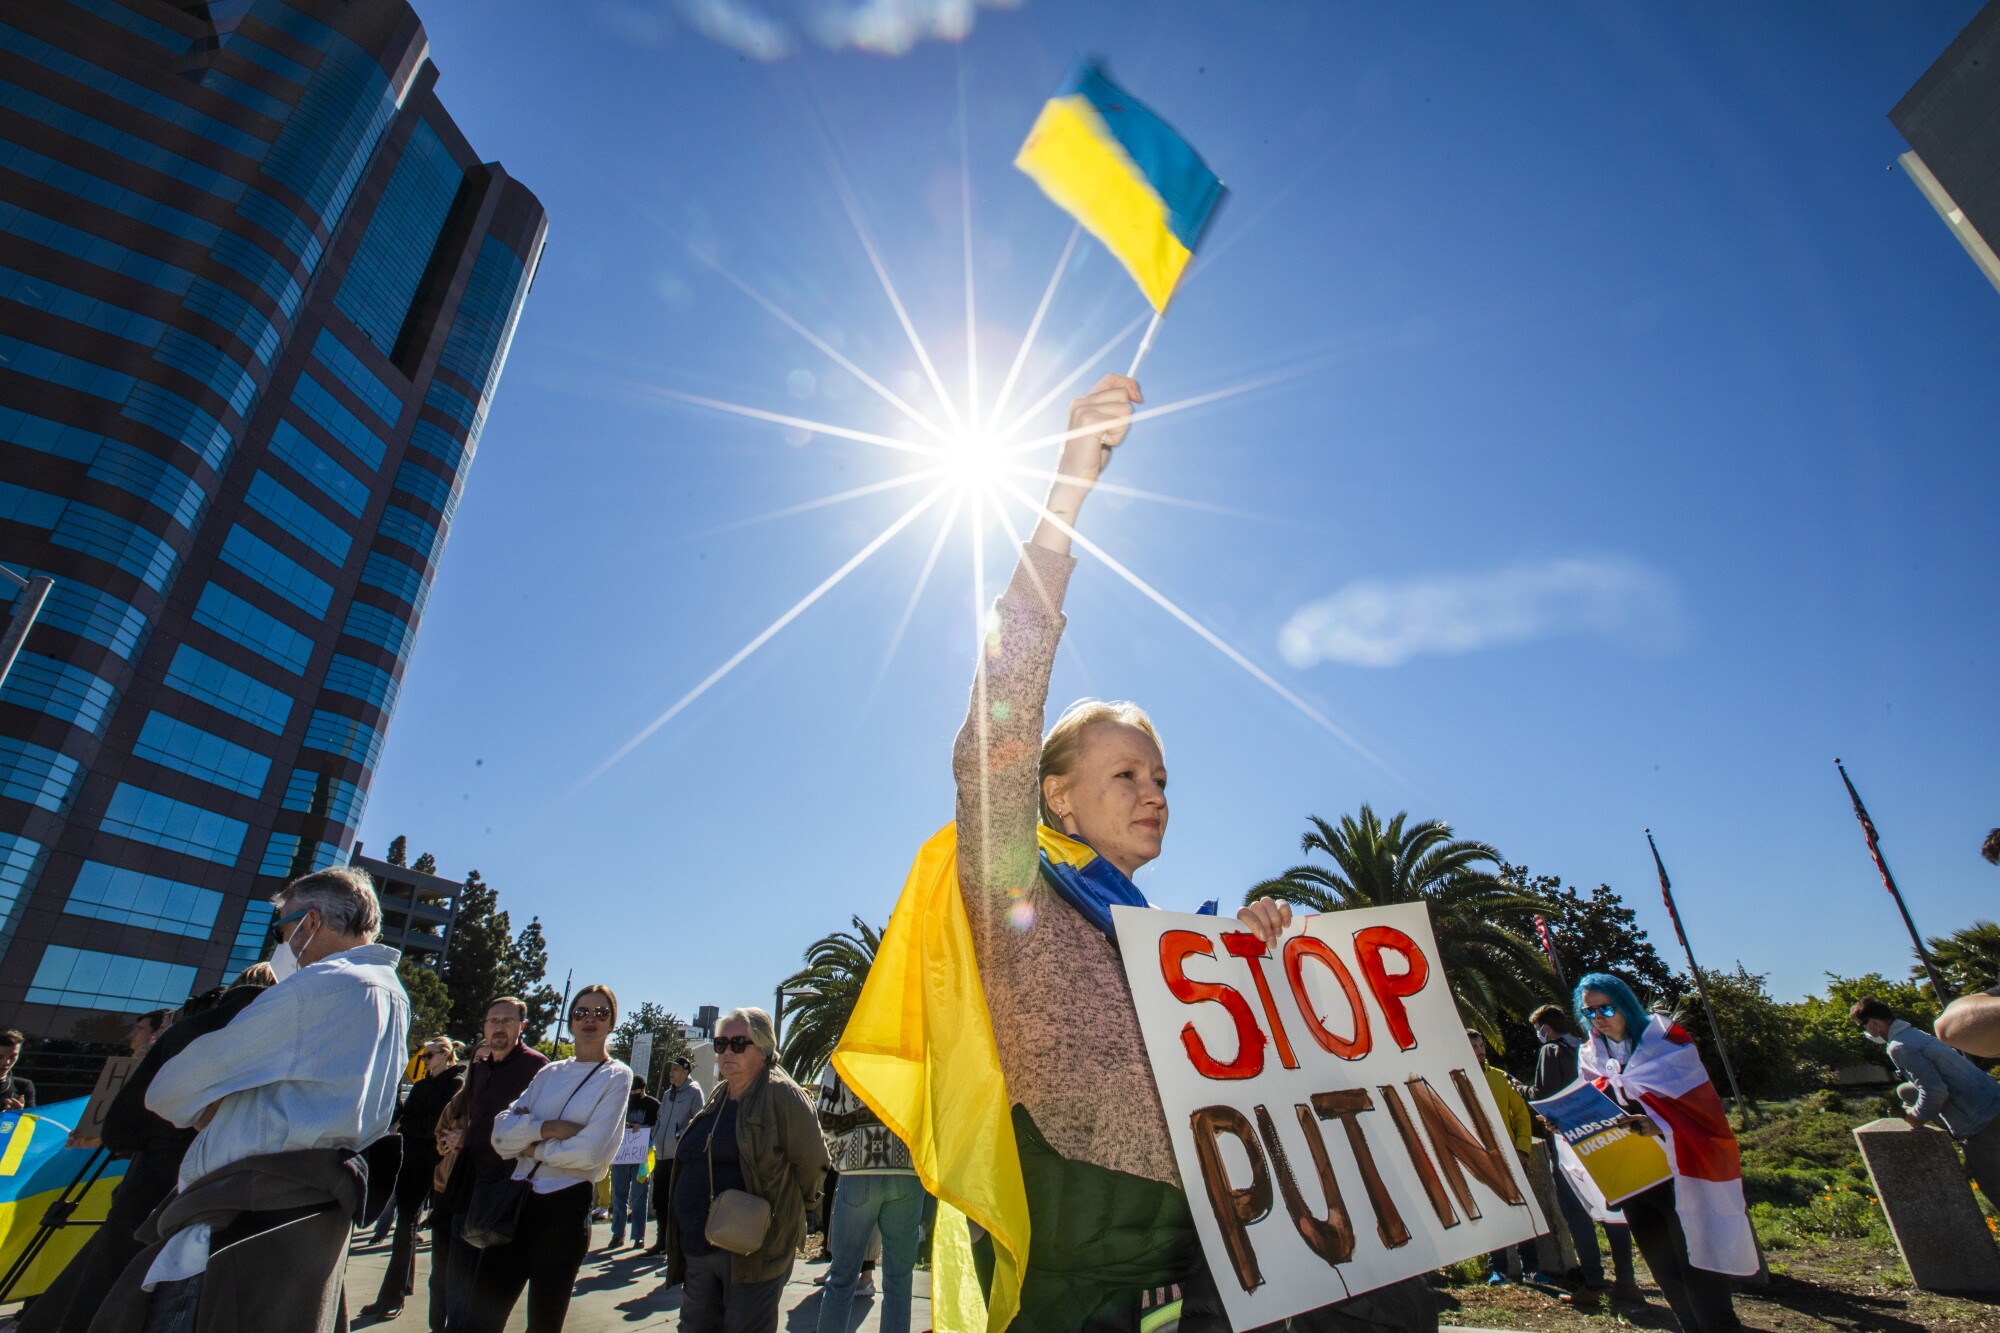 Kseniia Korniienk demonstrates with over 100 members of the Ukrainian community at the Federal Building in Westwood